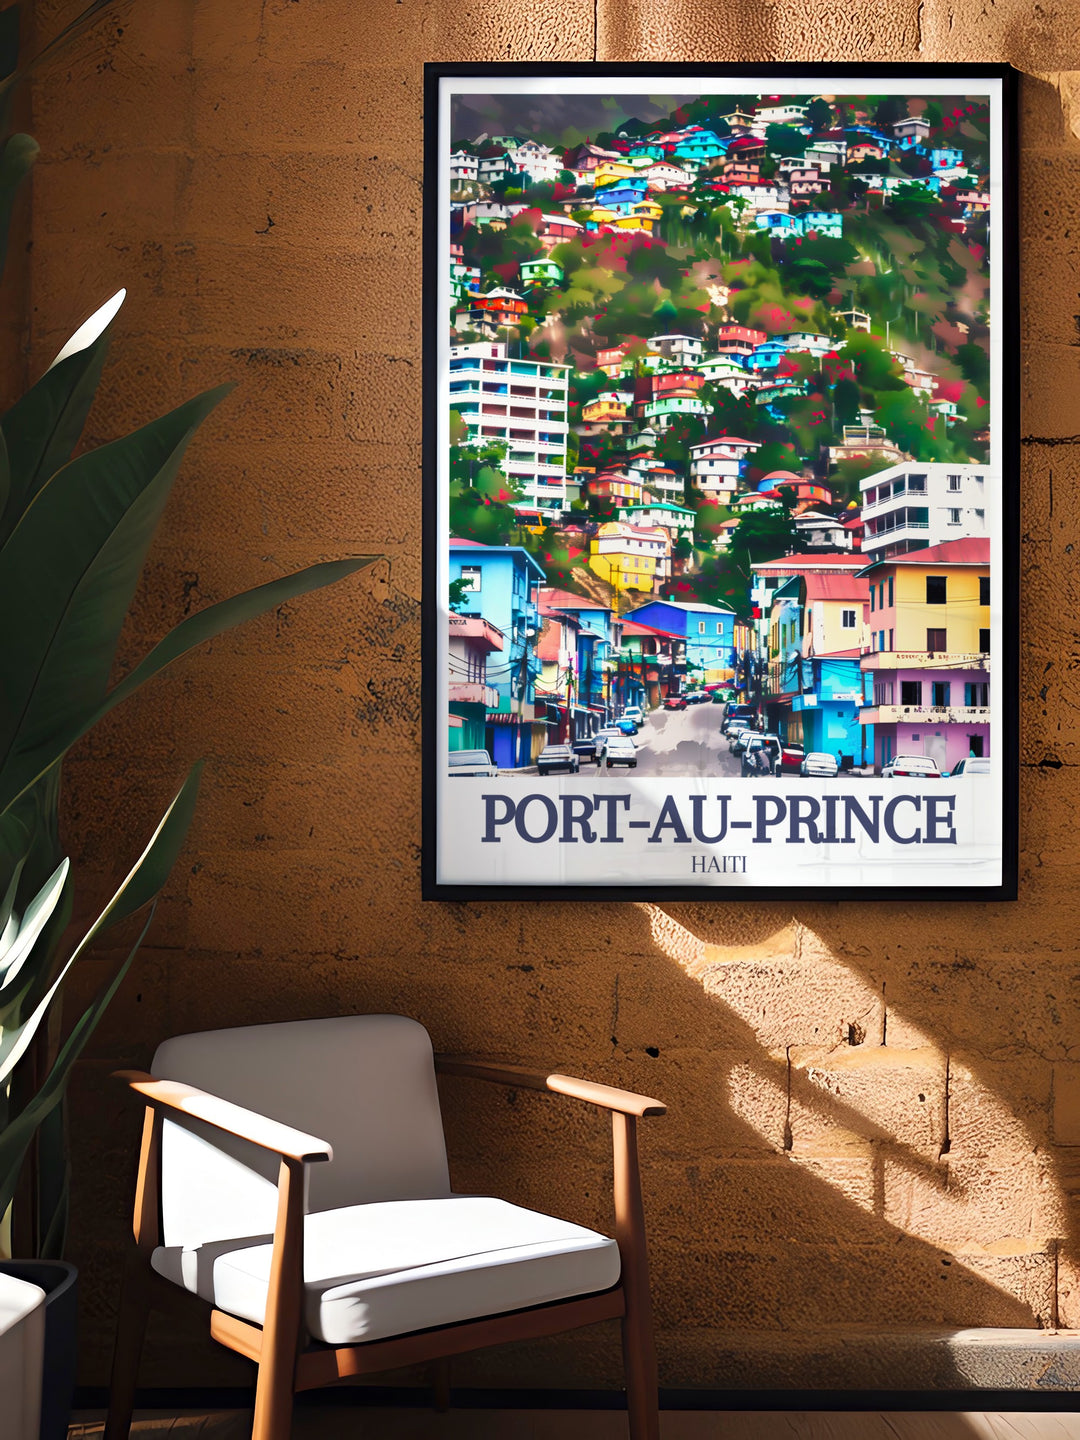 Personalized Haiti Travel Art featuring scenes from Pétion Ville Massif de la Selle and Port au Prince perfect for elegant home decor and unique travel gifts